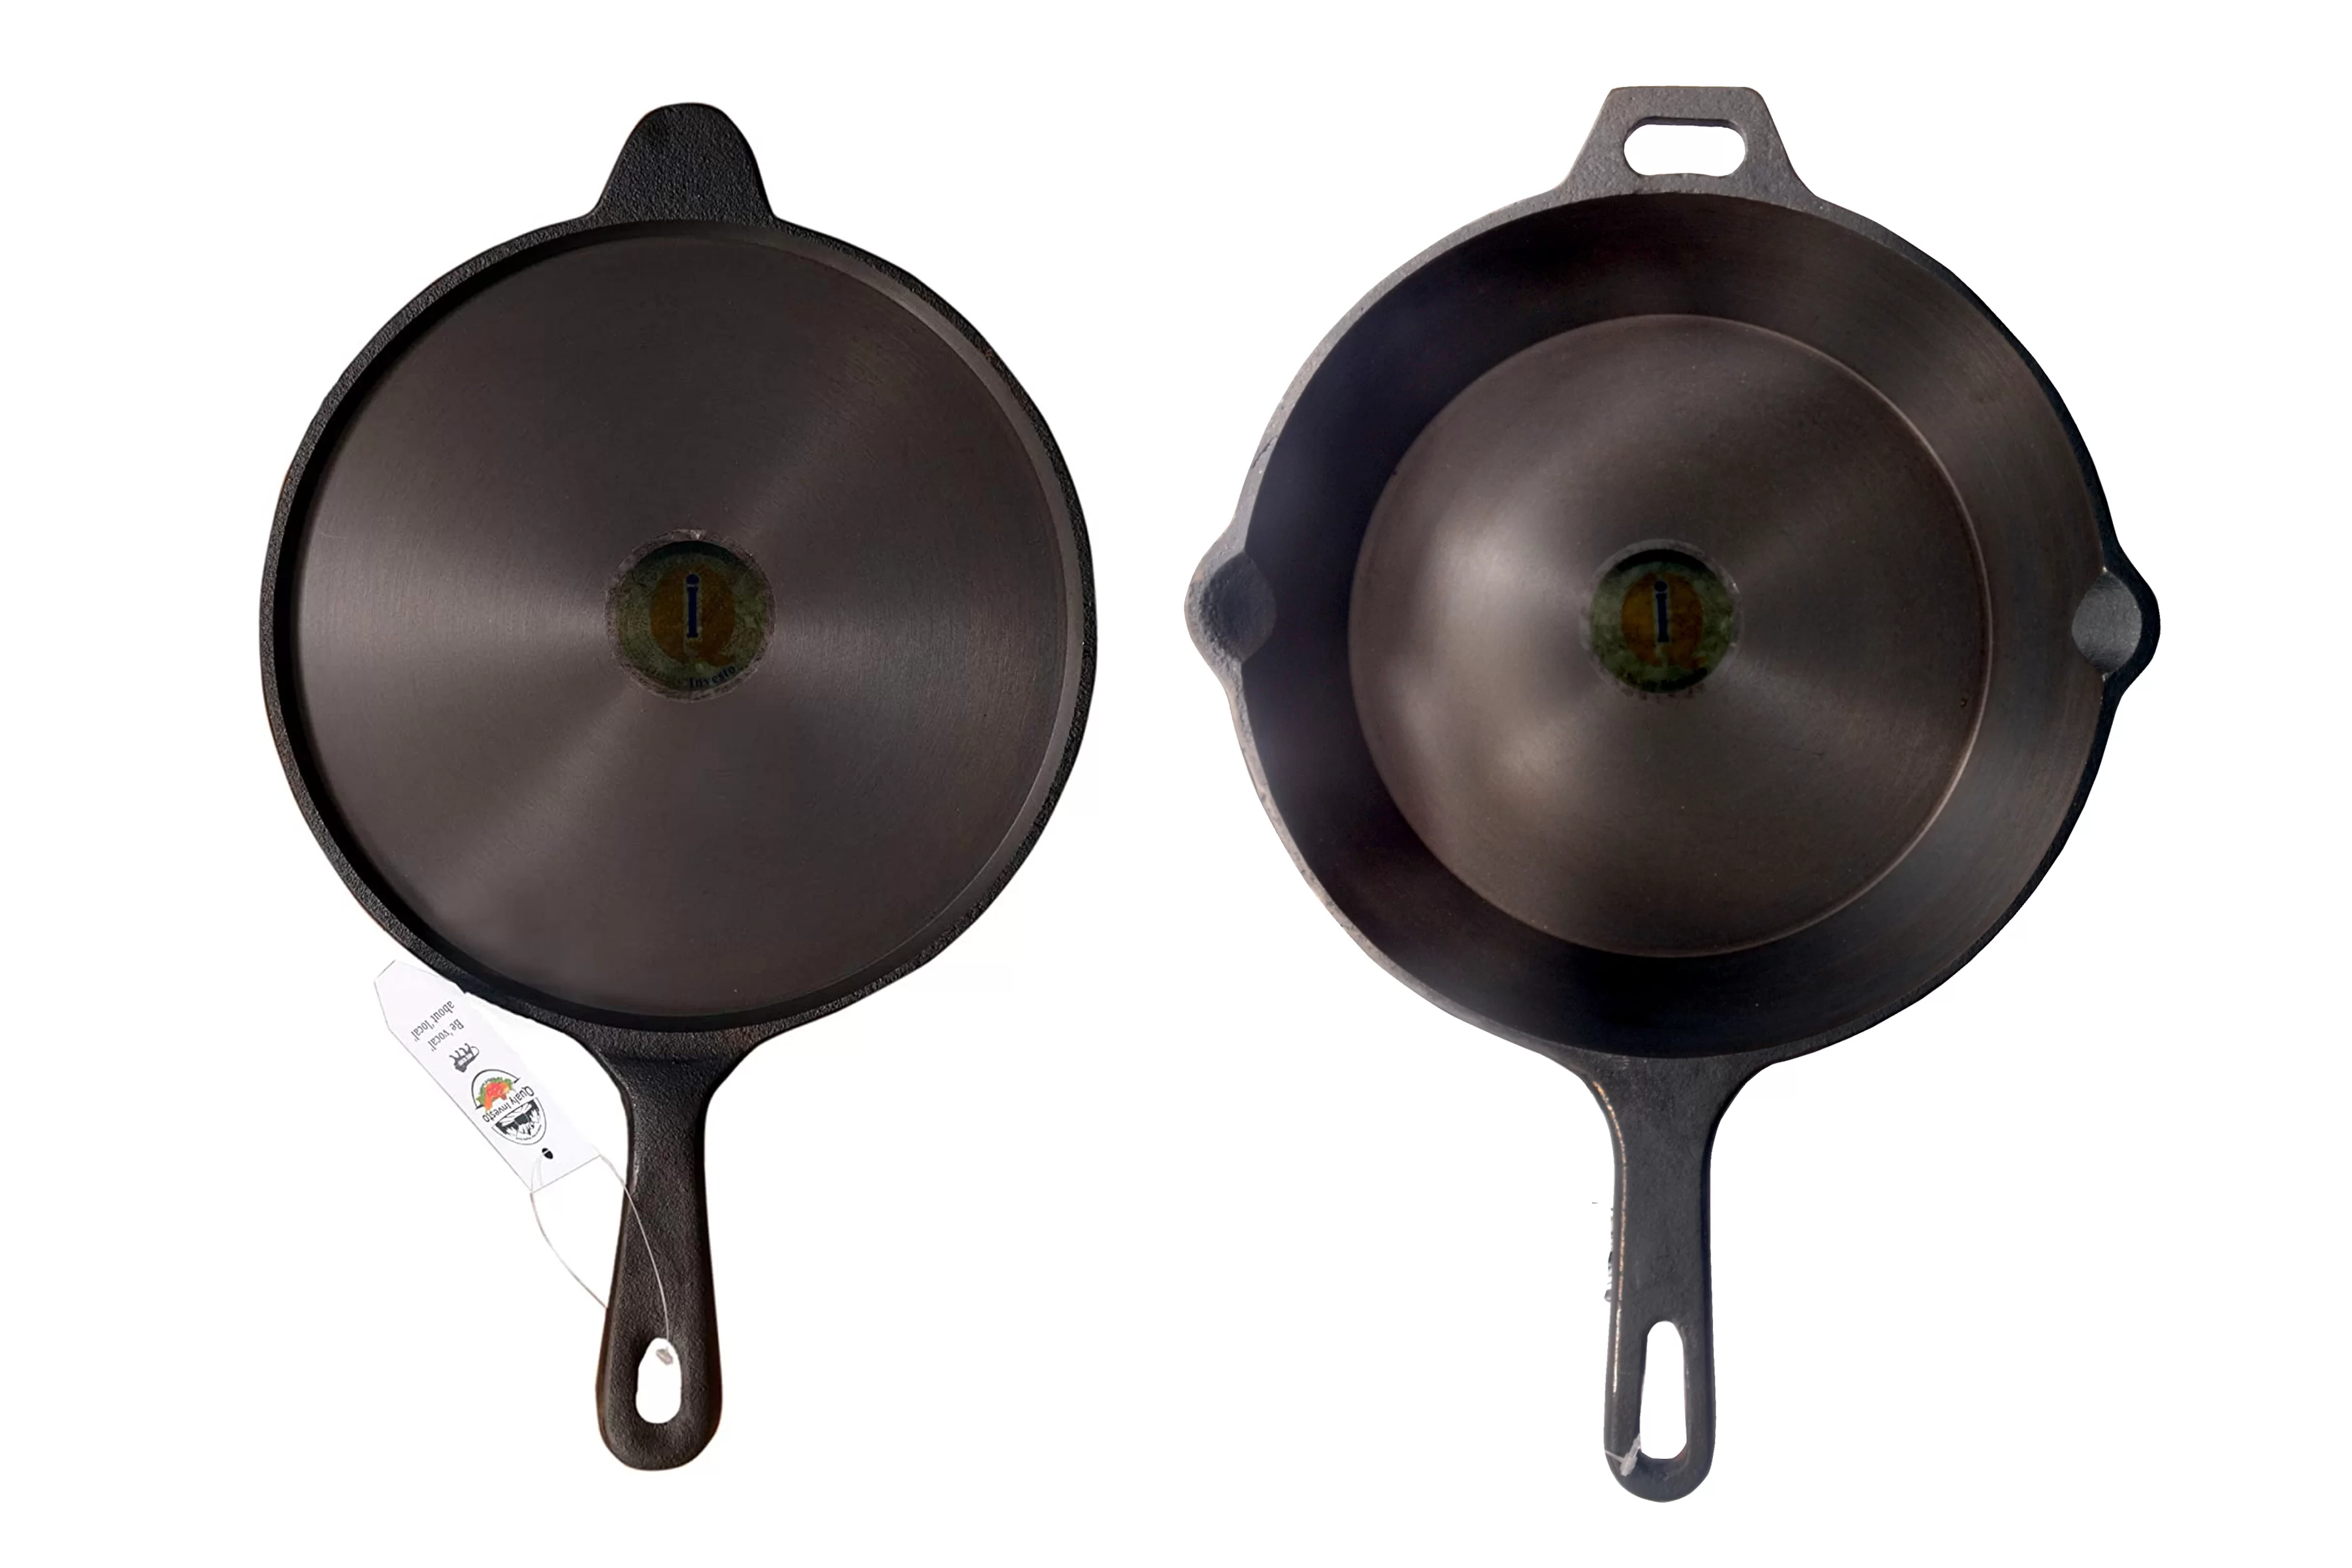 https://www.qualyinvesto.com/image/cache/catalog/images/Combos/LHDT_Skillet_Large/qualy-investo-pre-seasoned-cast-iron-dosa-tawa-with-long-handle-27cm-skillet-pan-frying-pan-tawa-10-25-inches-3600x2400.jpg.webp